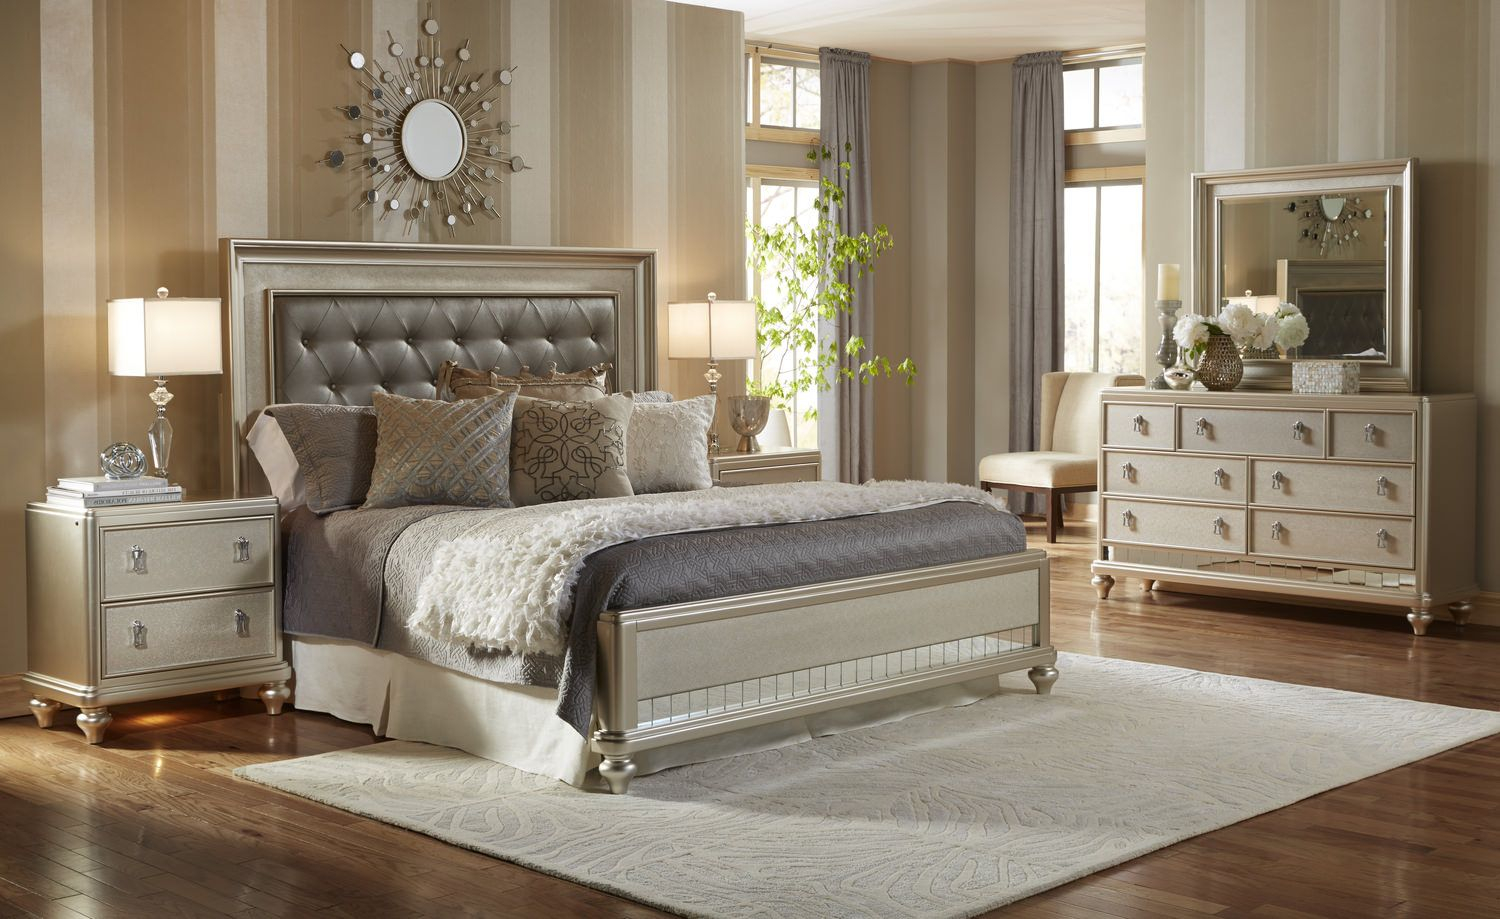 Zsa Zsa Bedroom Suite In 2019 Home Decor Design Upholstered with dimensions 1500 X 919